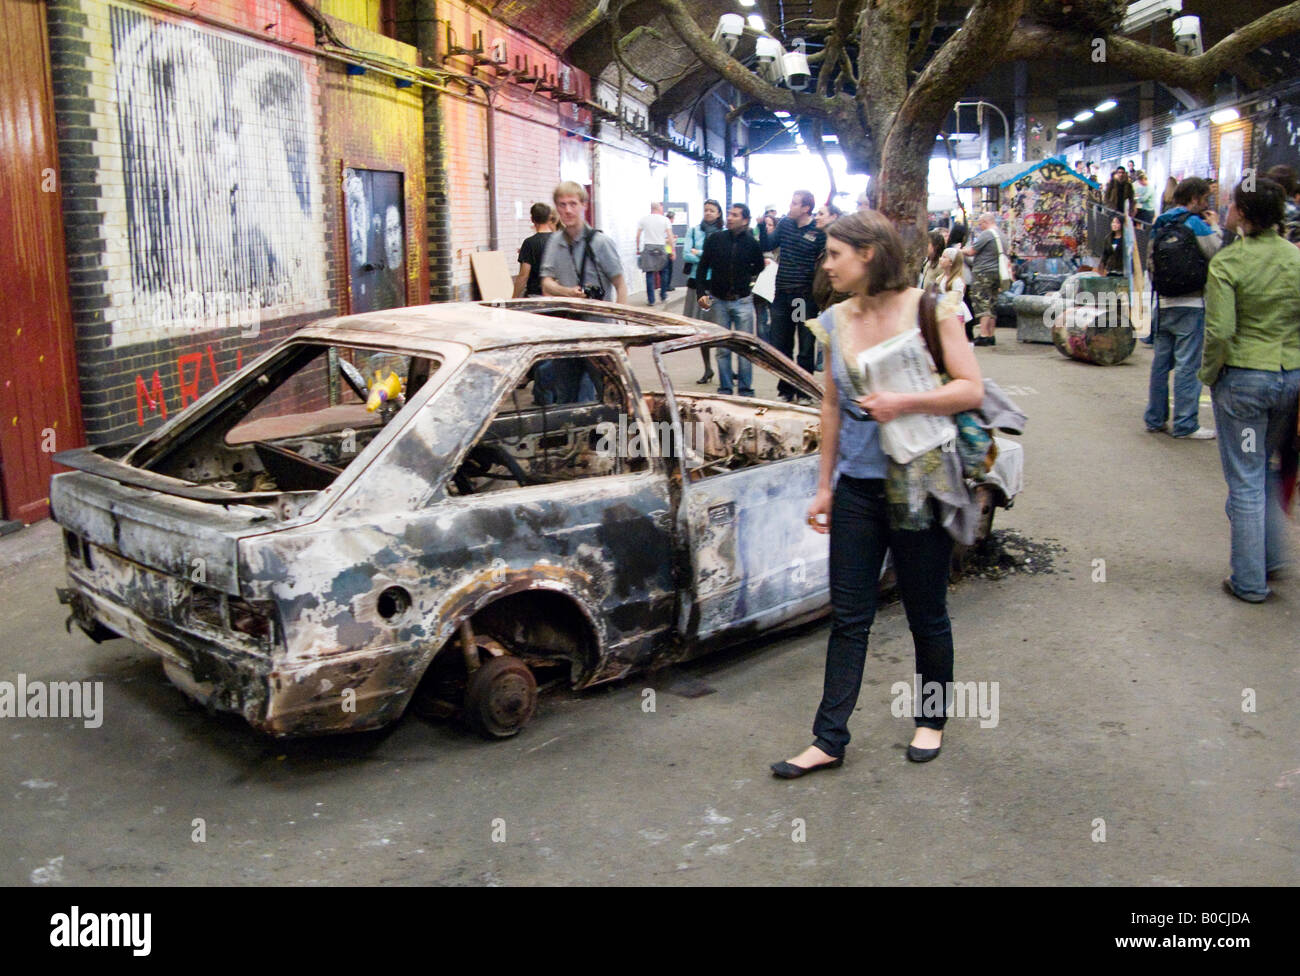 Burnt out stripped car - an image from The Cans Festival, a London street exhibition graffito artist Banksy helped to open Stock Photo